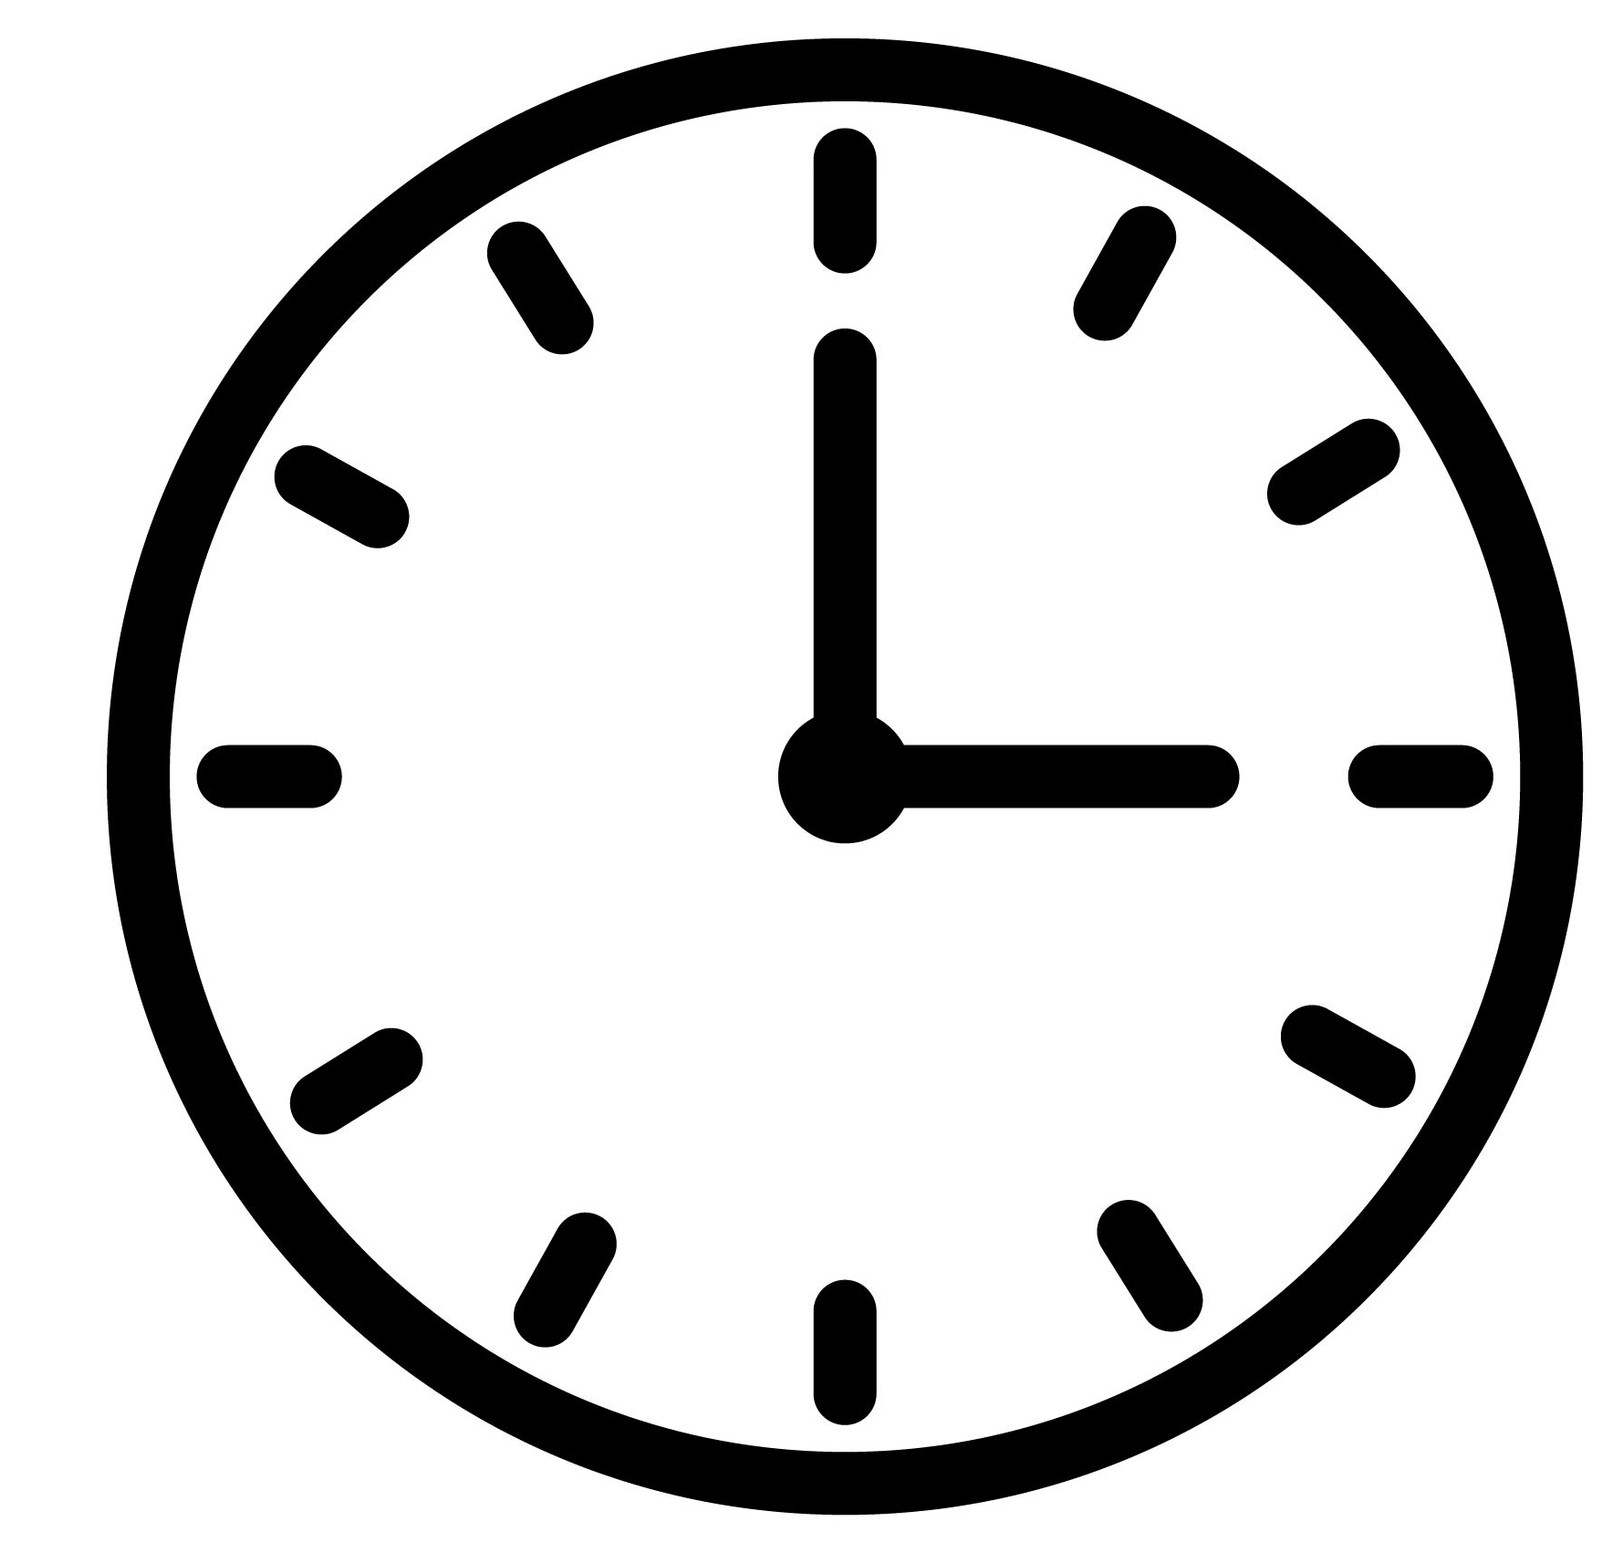 Black and white illustration of a clock showing exactly 3 o'clock.